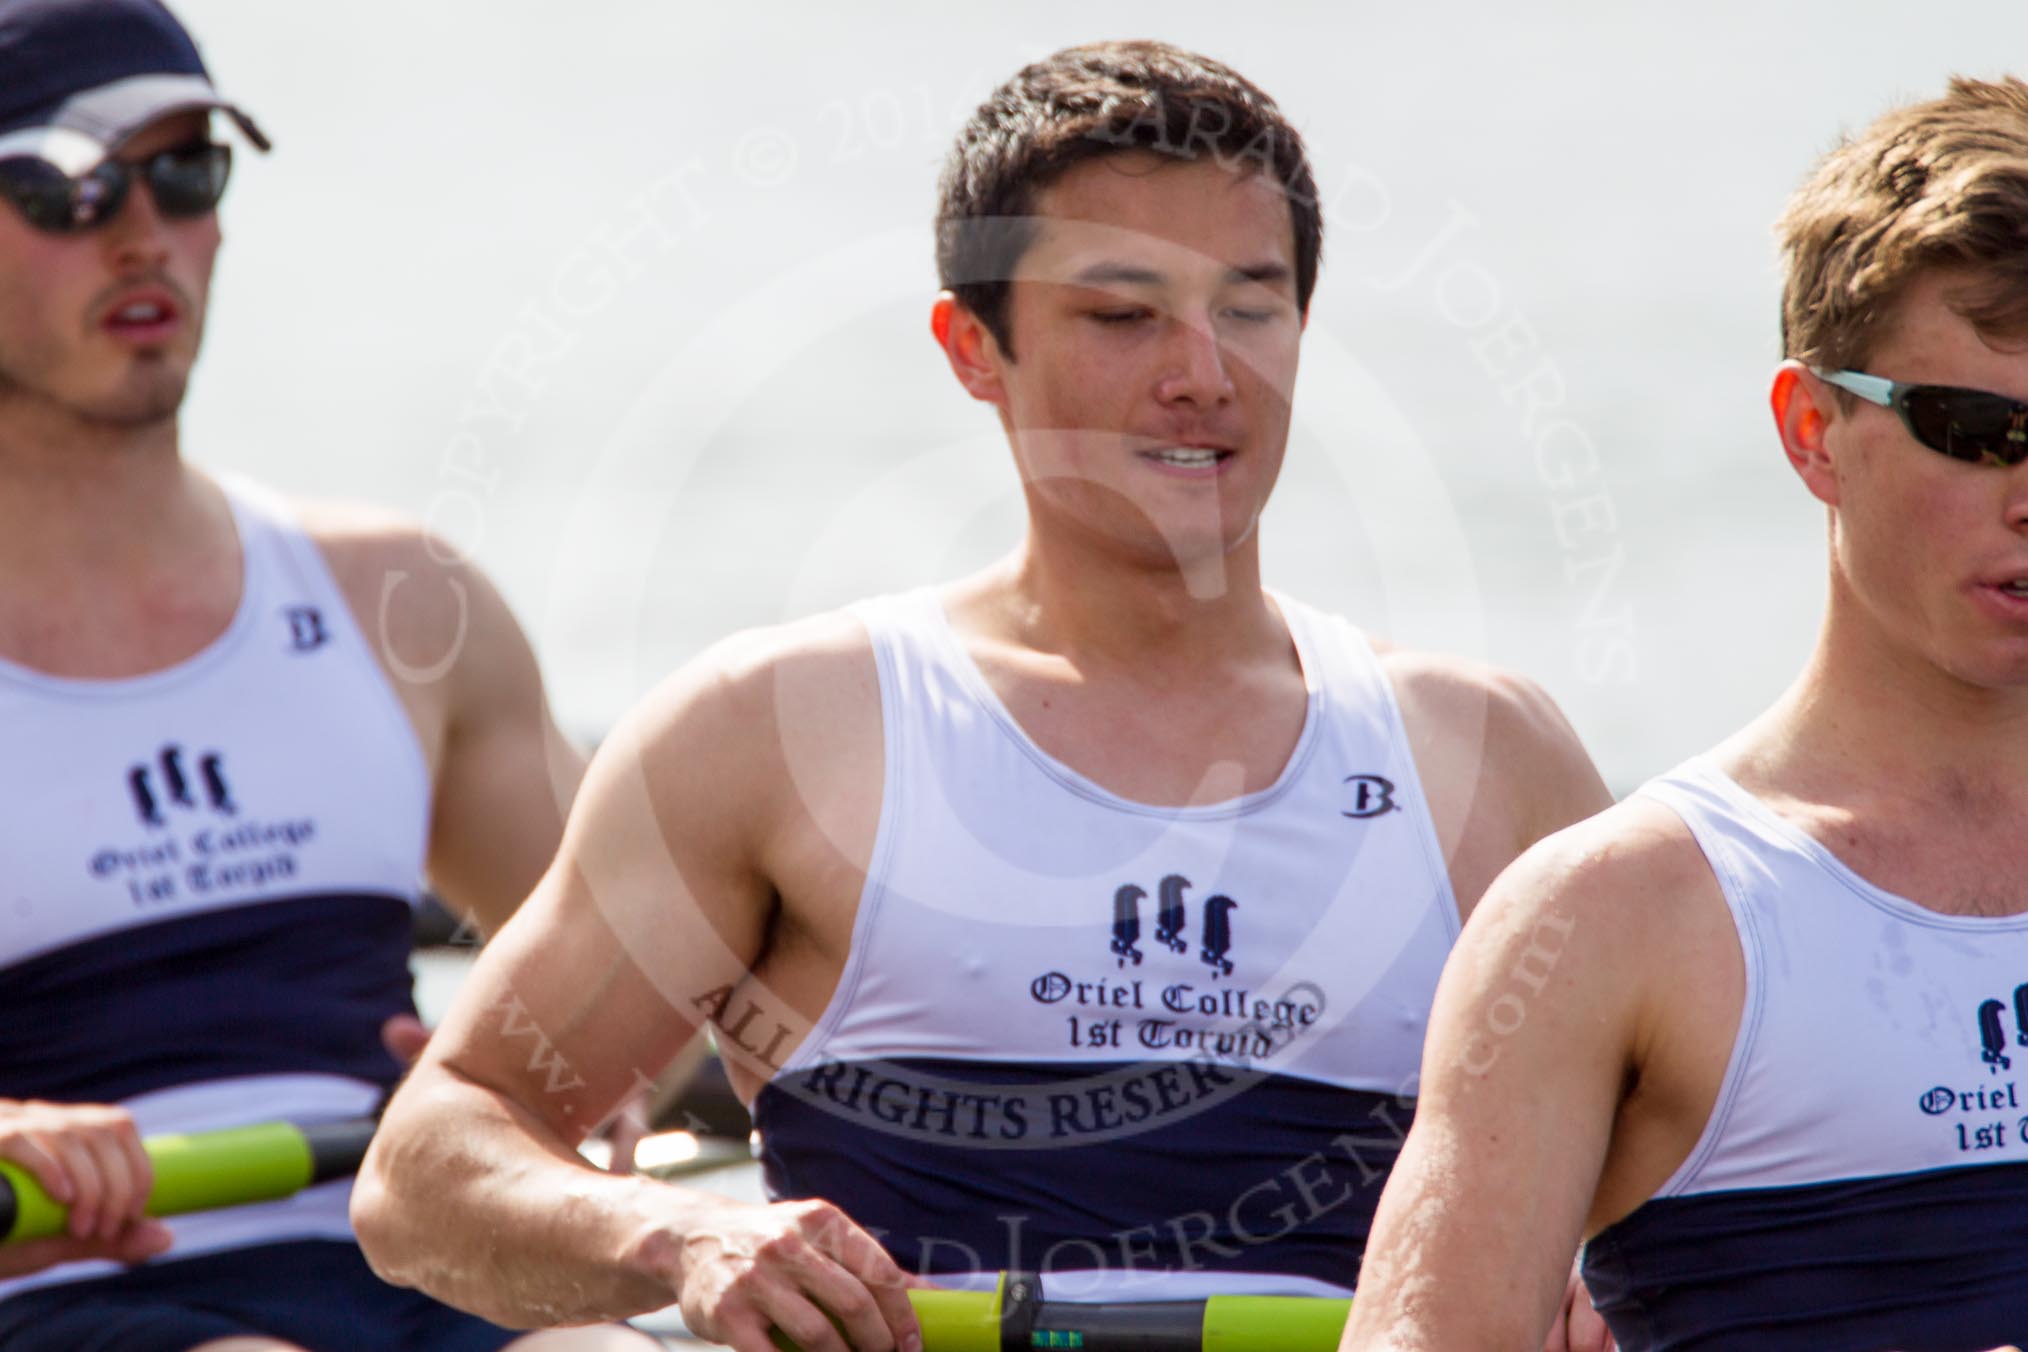 The Women's Boat Race and Henley Boat Races 2014: The Intercollegiate Men 's Race, in the Oriel College boat in the 6 seat  Calum Pontin, 7 Kelvin Jackson, and stroke Rufus Stirling..
River Thames,
Henley-on-Thames,
Buckinghamshire,
United Kingdom,
on 30 March 2014 at 14:00, image #126